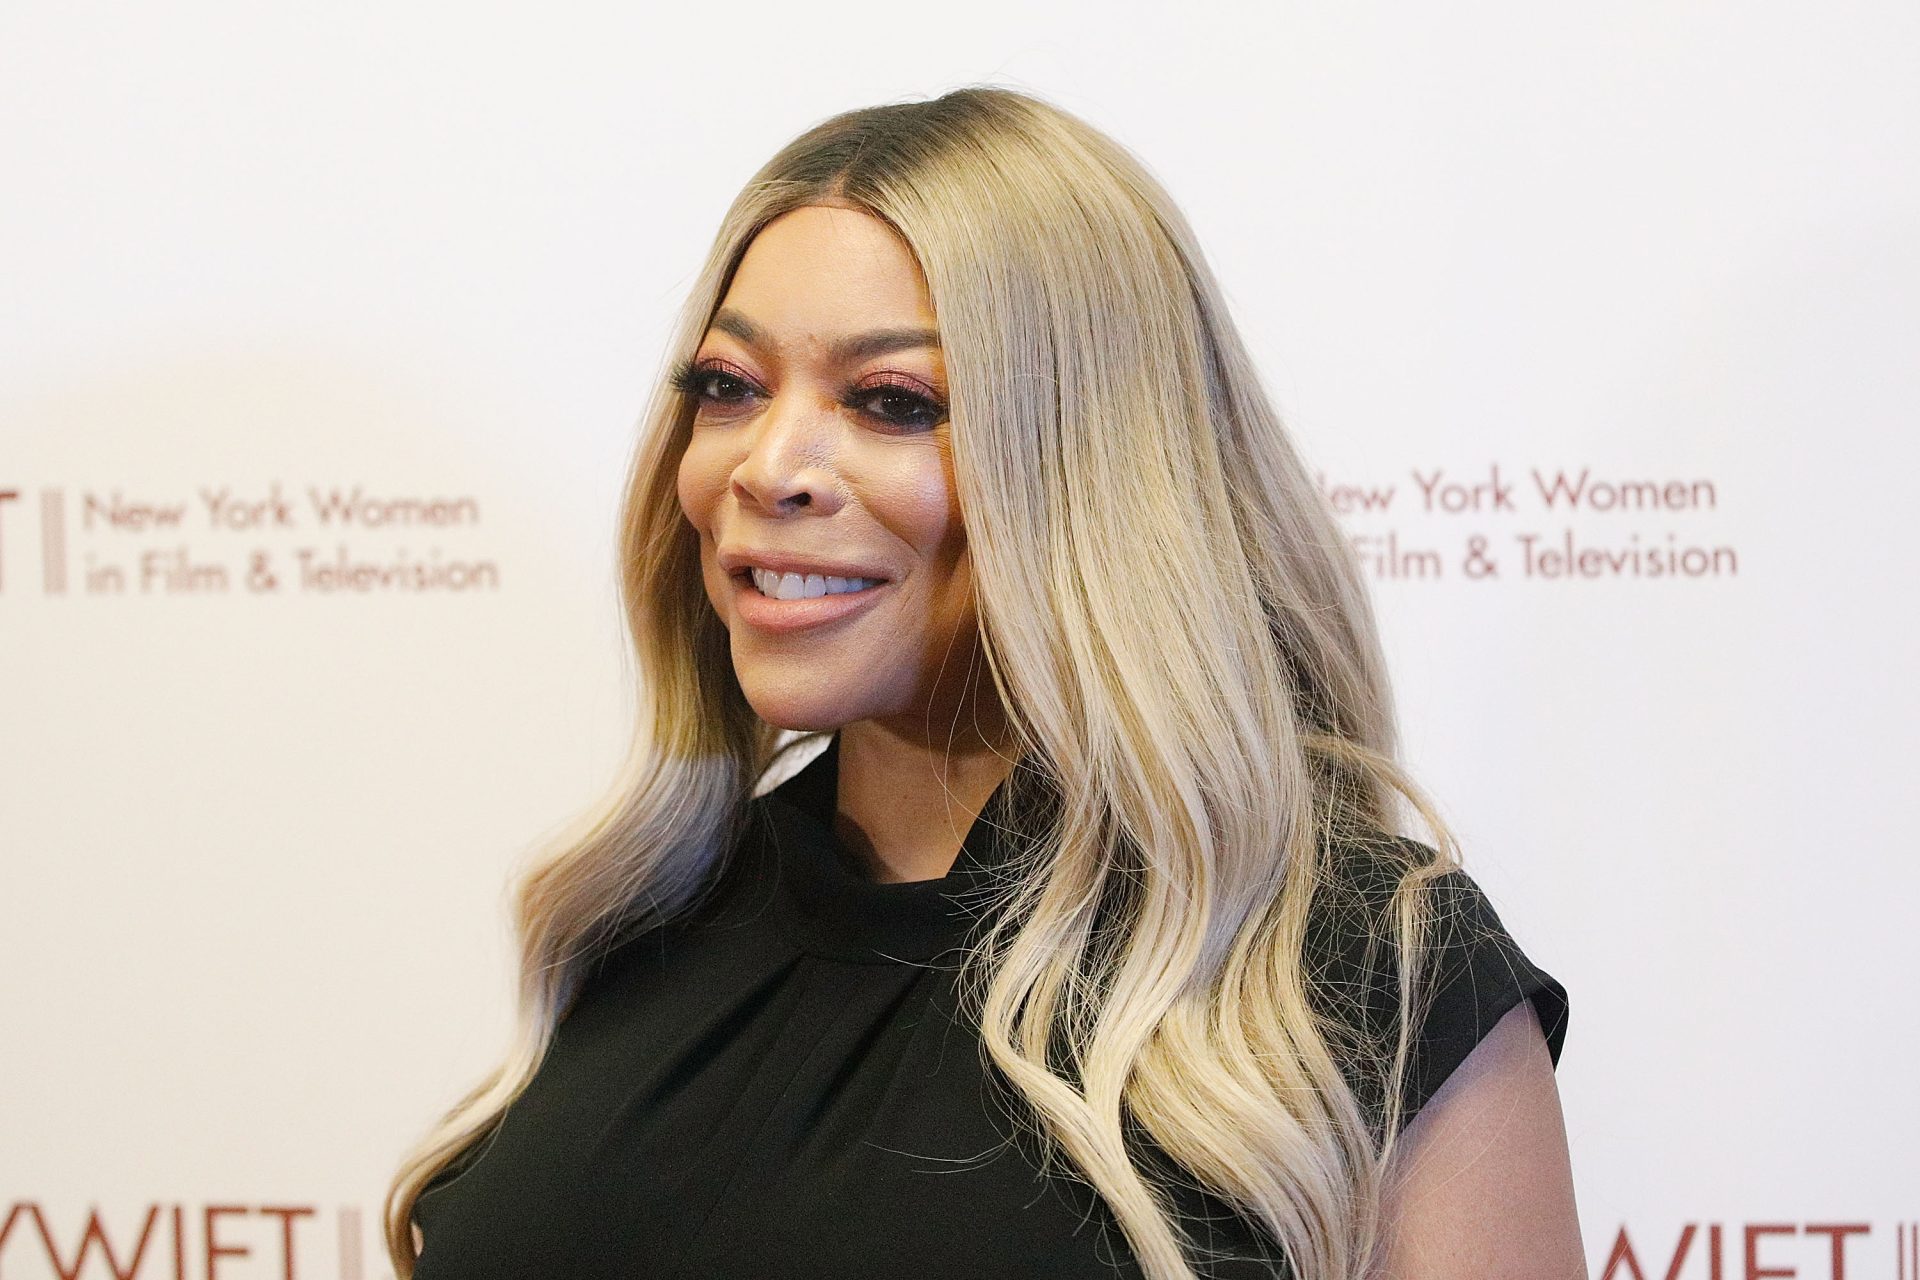 Wendy Williams Gives Update On Her Health: "I Have The Mind And Body Of A 25-Year-Old"